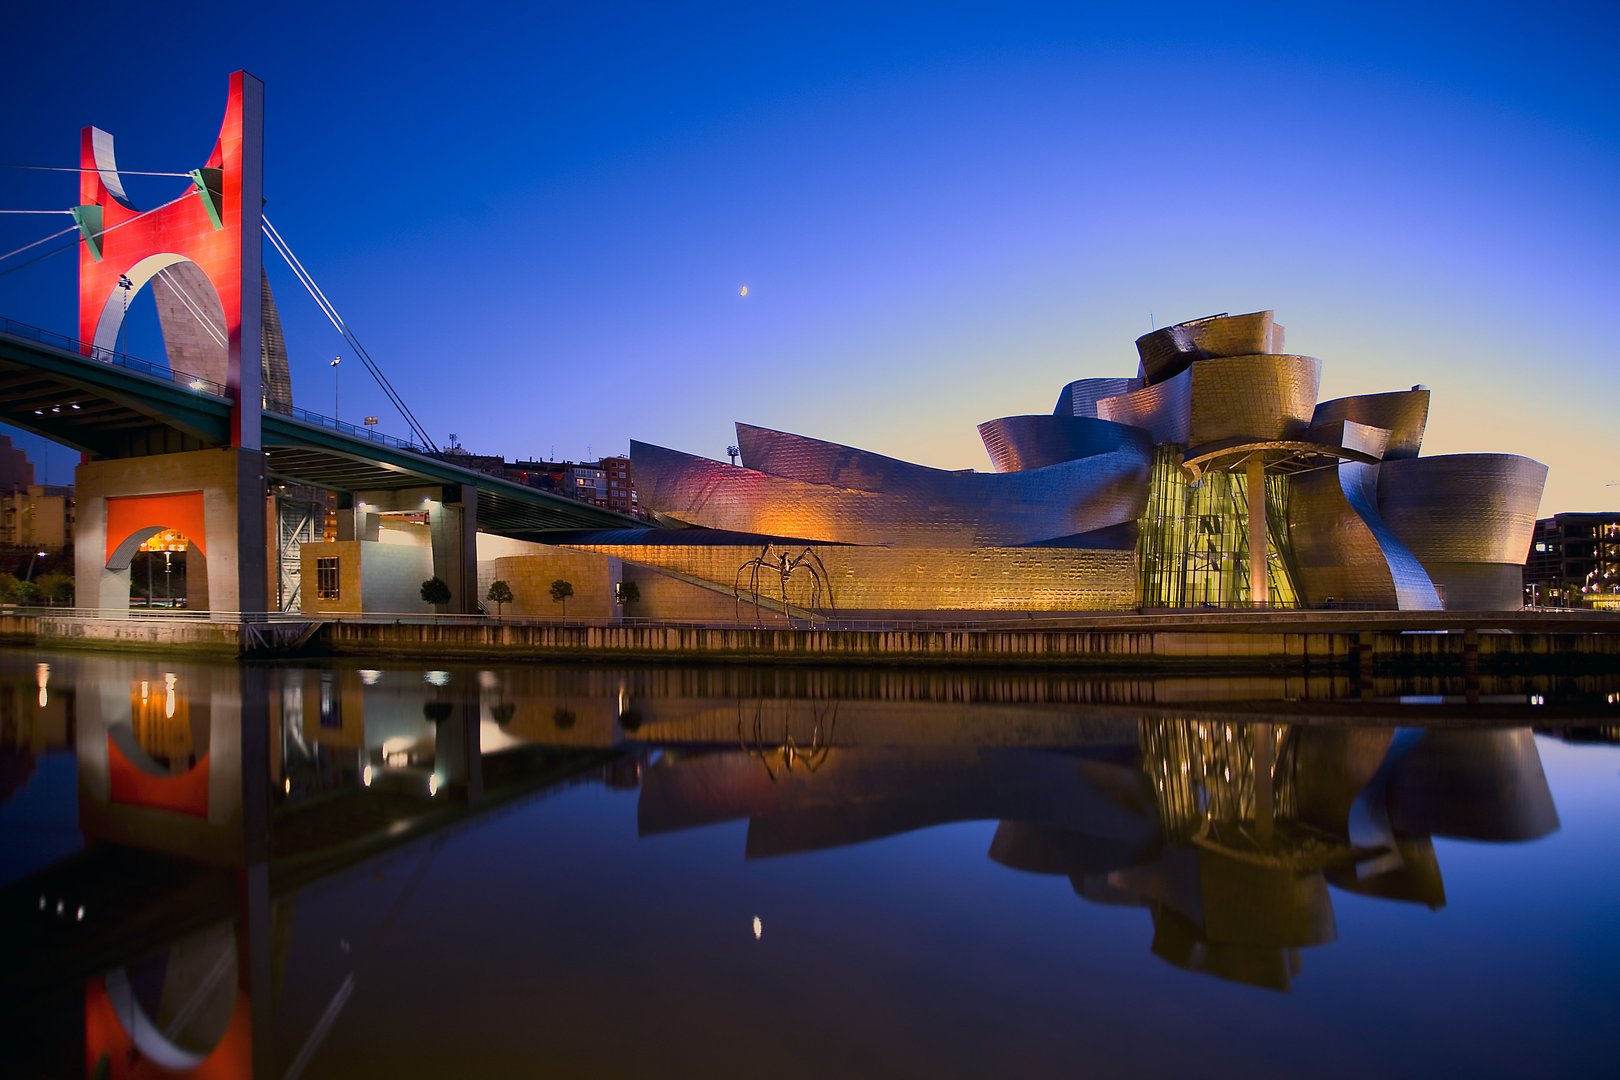 Guggenheim in Bilbao, part of the Basque Country in Spain